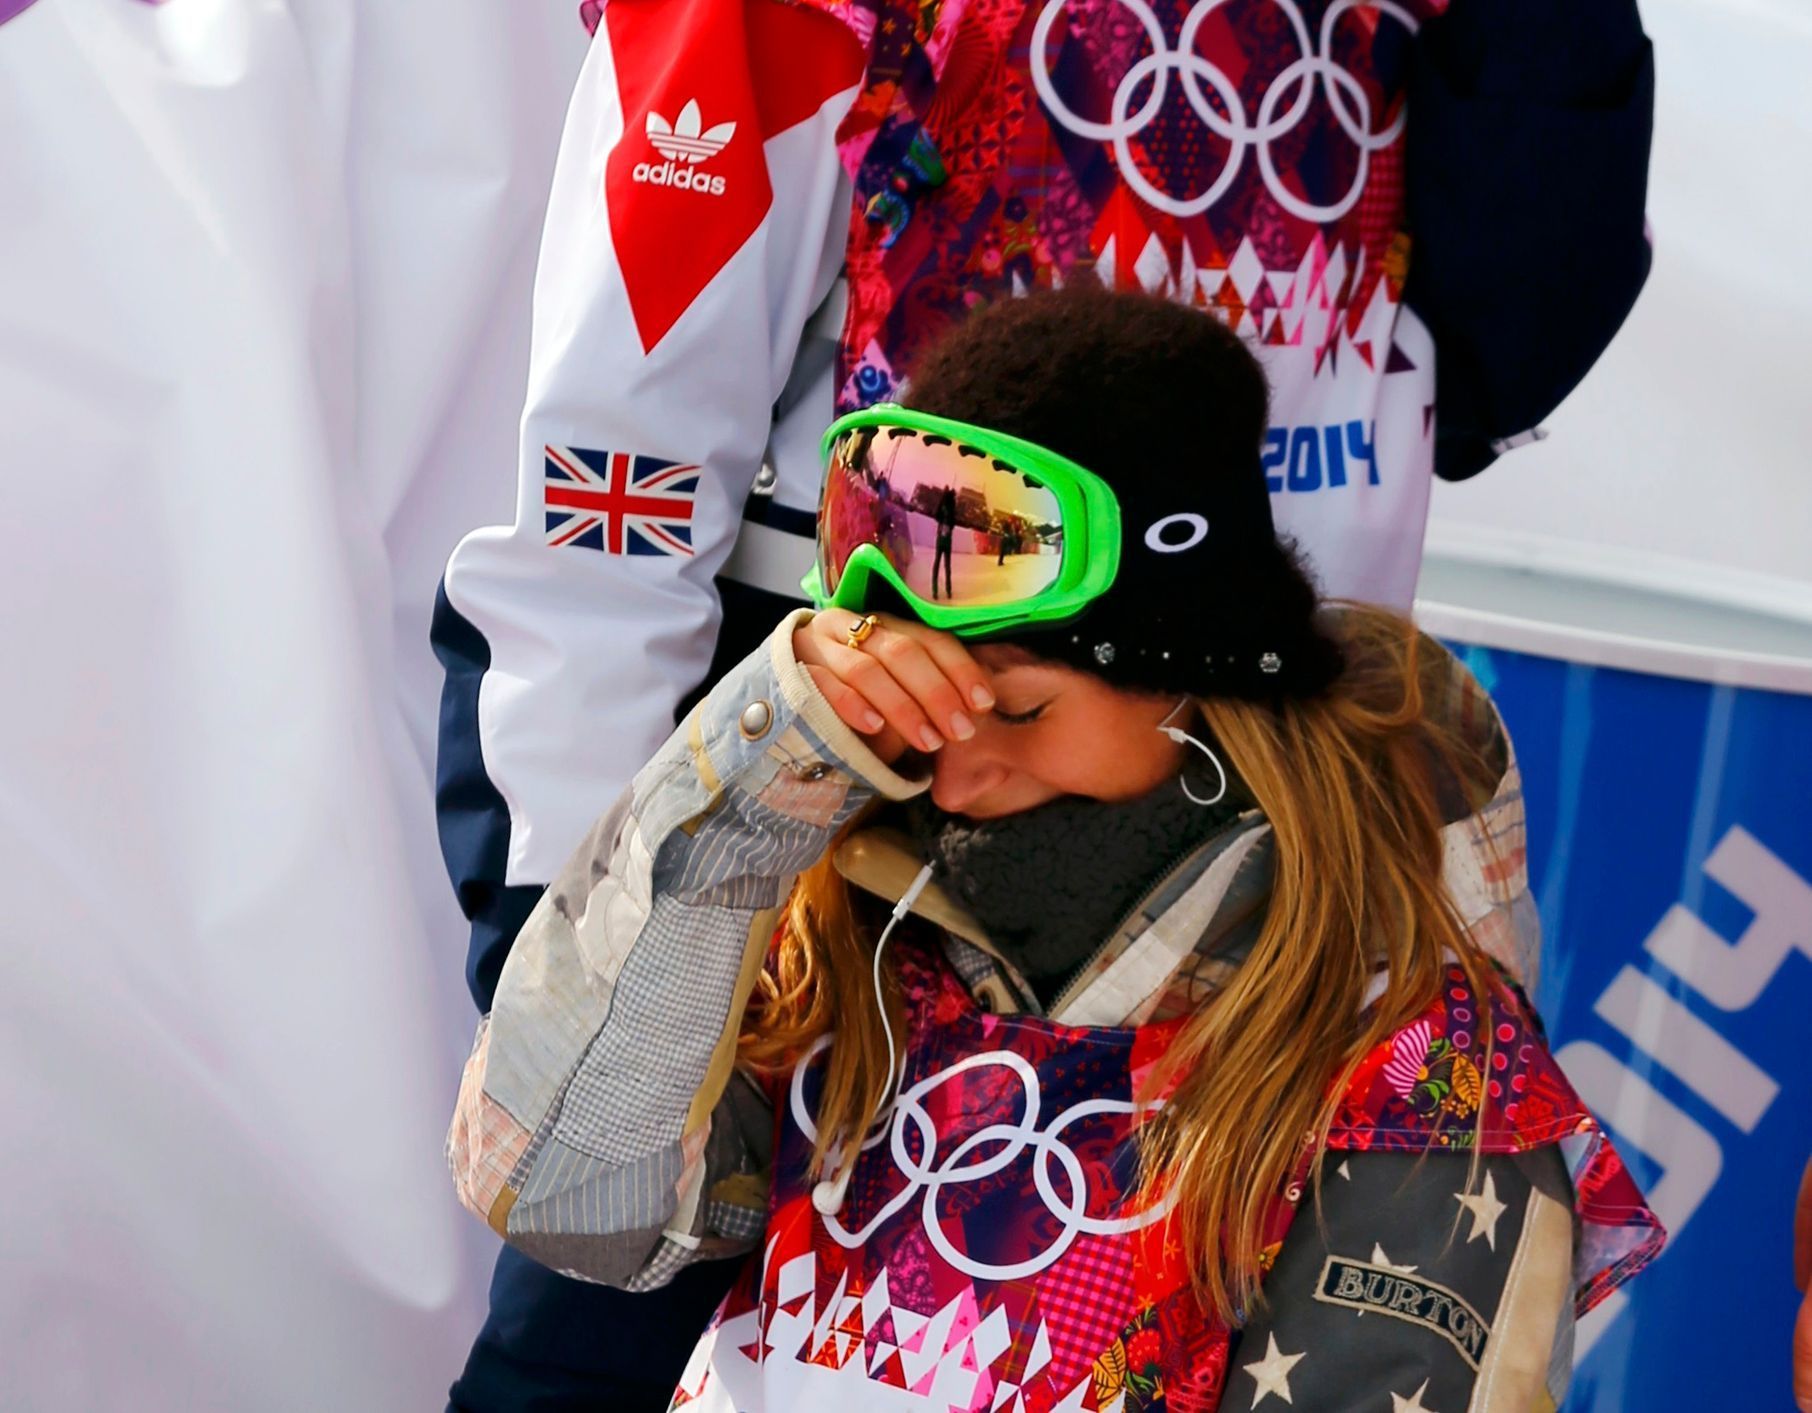 Jamie Anderson of the U.S. celebrates after winning the women's snowboard slopestyle competition at the 2014 Sochi Olympic Games in Rosa Khutor